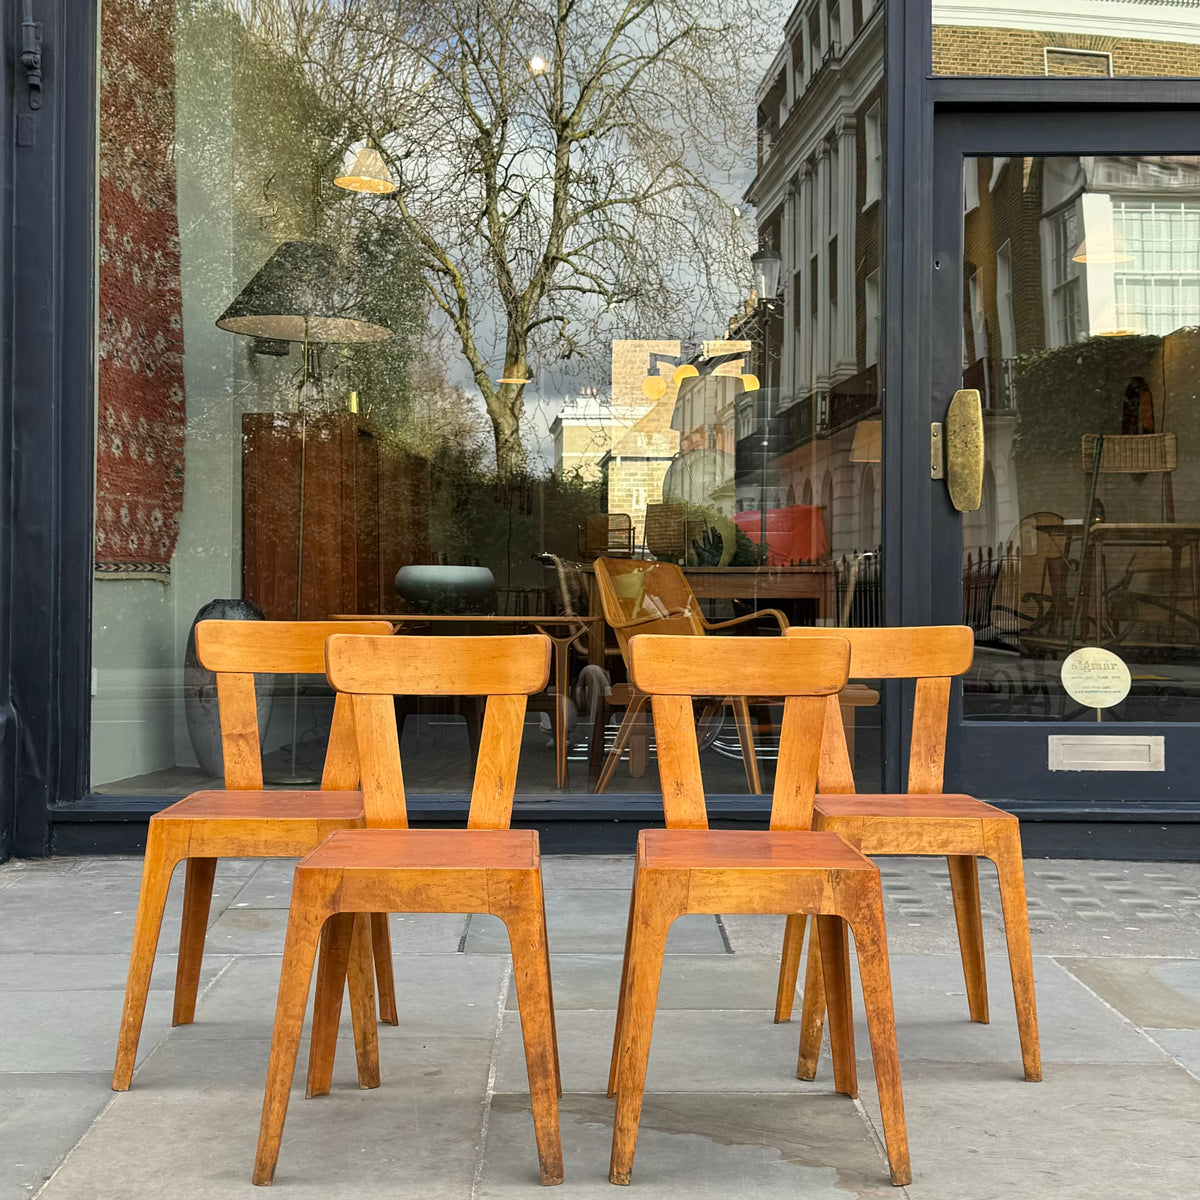 Set of 4 Birch Plywood Chairs Sweden, Early-1950s